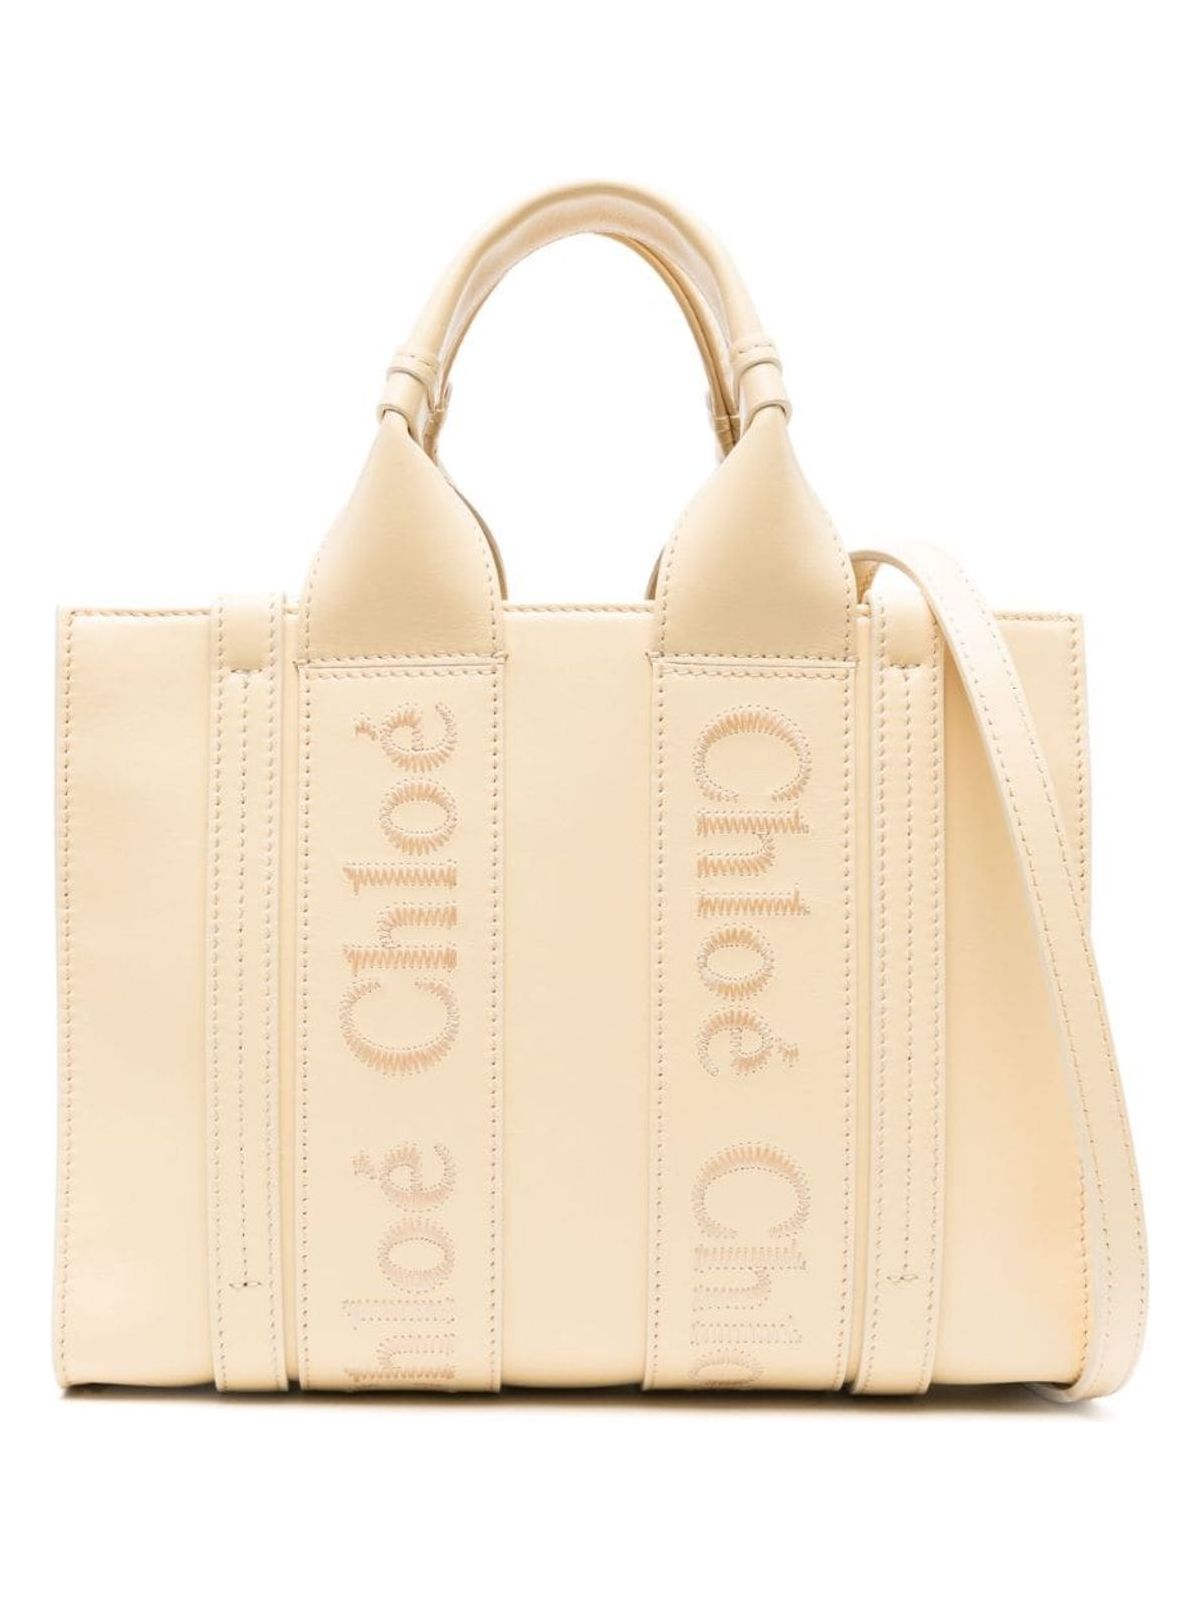 WOODY752 CHLOÉ WOODY SMALL LEATHER TOTE